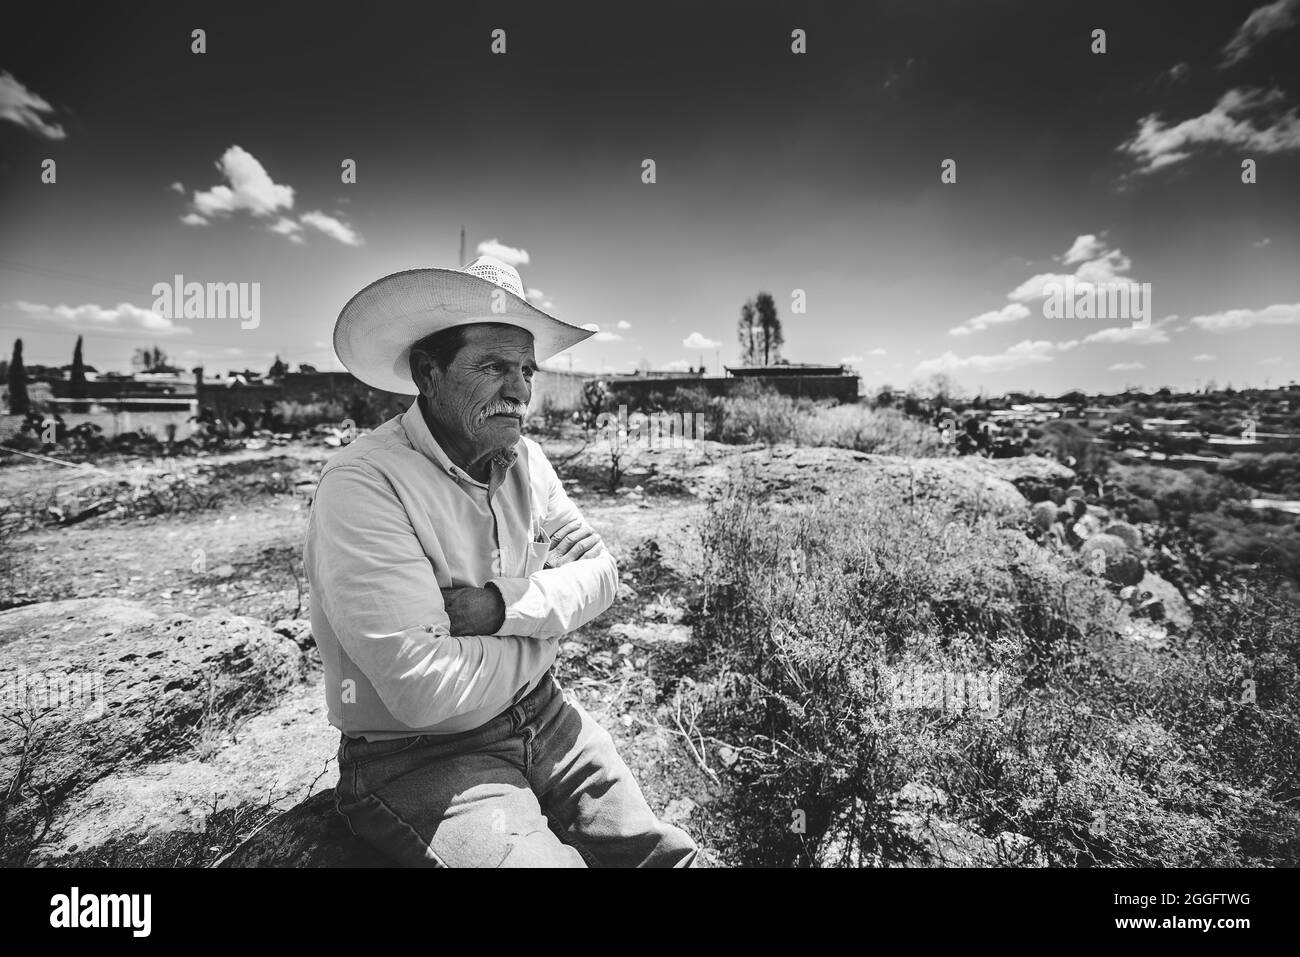 ZACATECAS, MEXICO - Apr 01, 2018: A grayscale shot of an old Hispanic with a cowboy hat sitting alone at a field in Zacatecas, Mexico Stock Photo